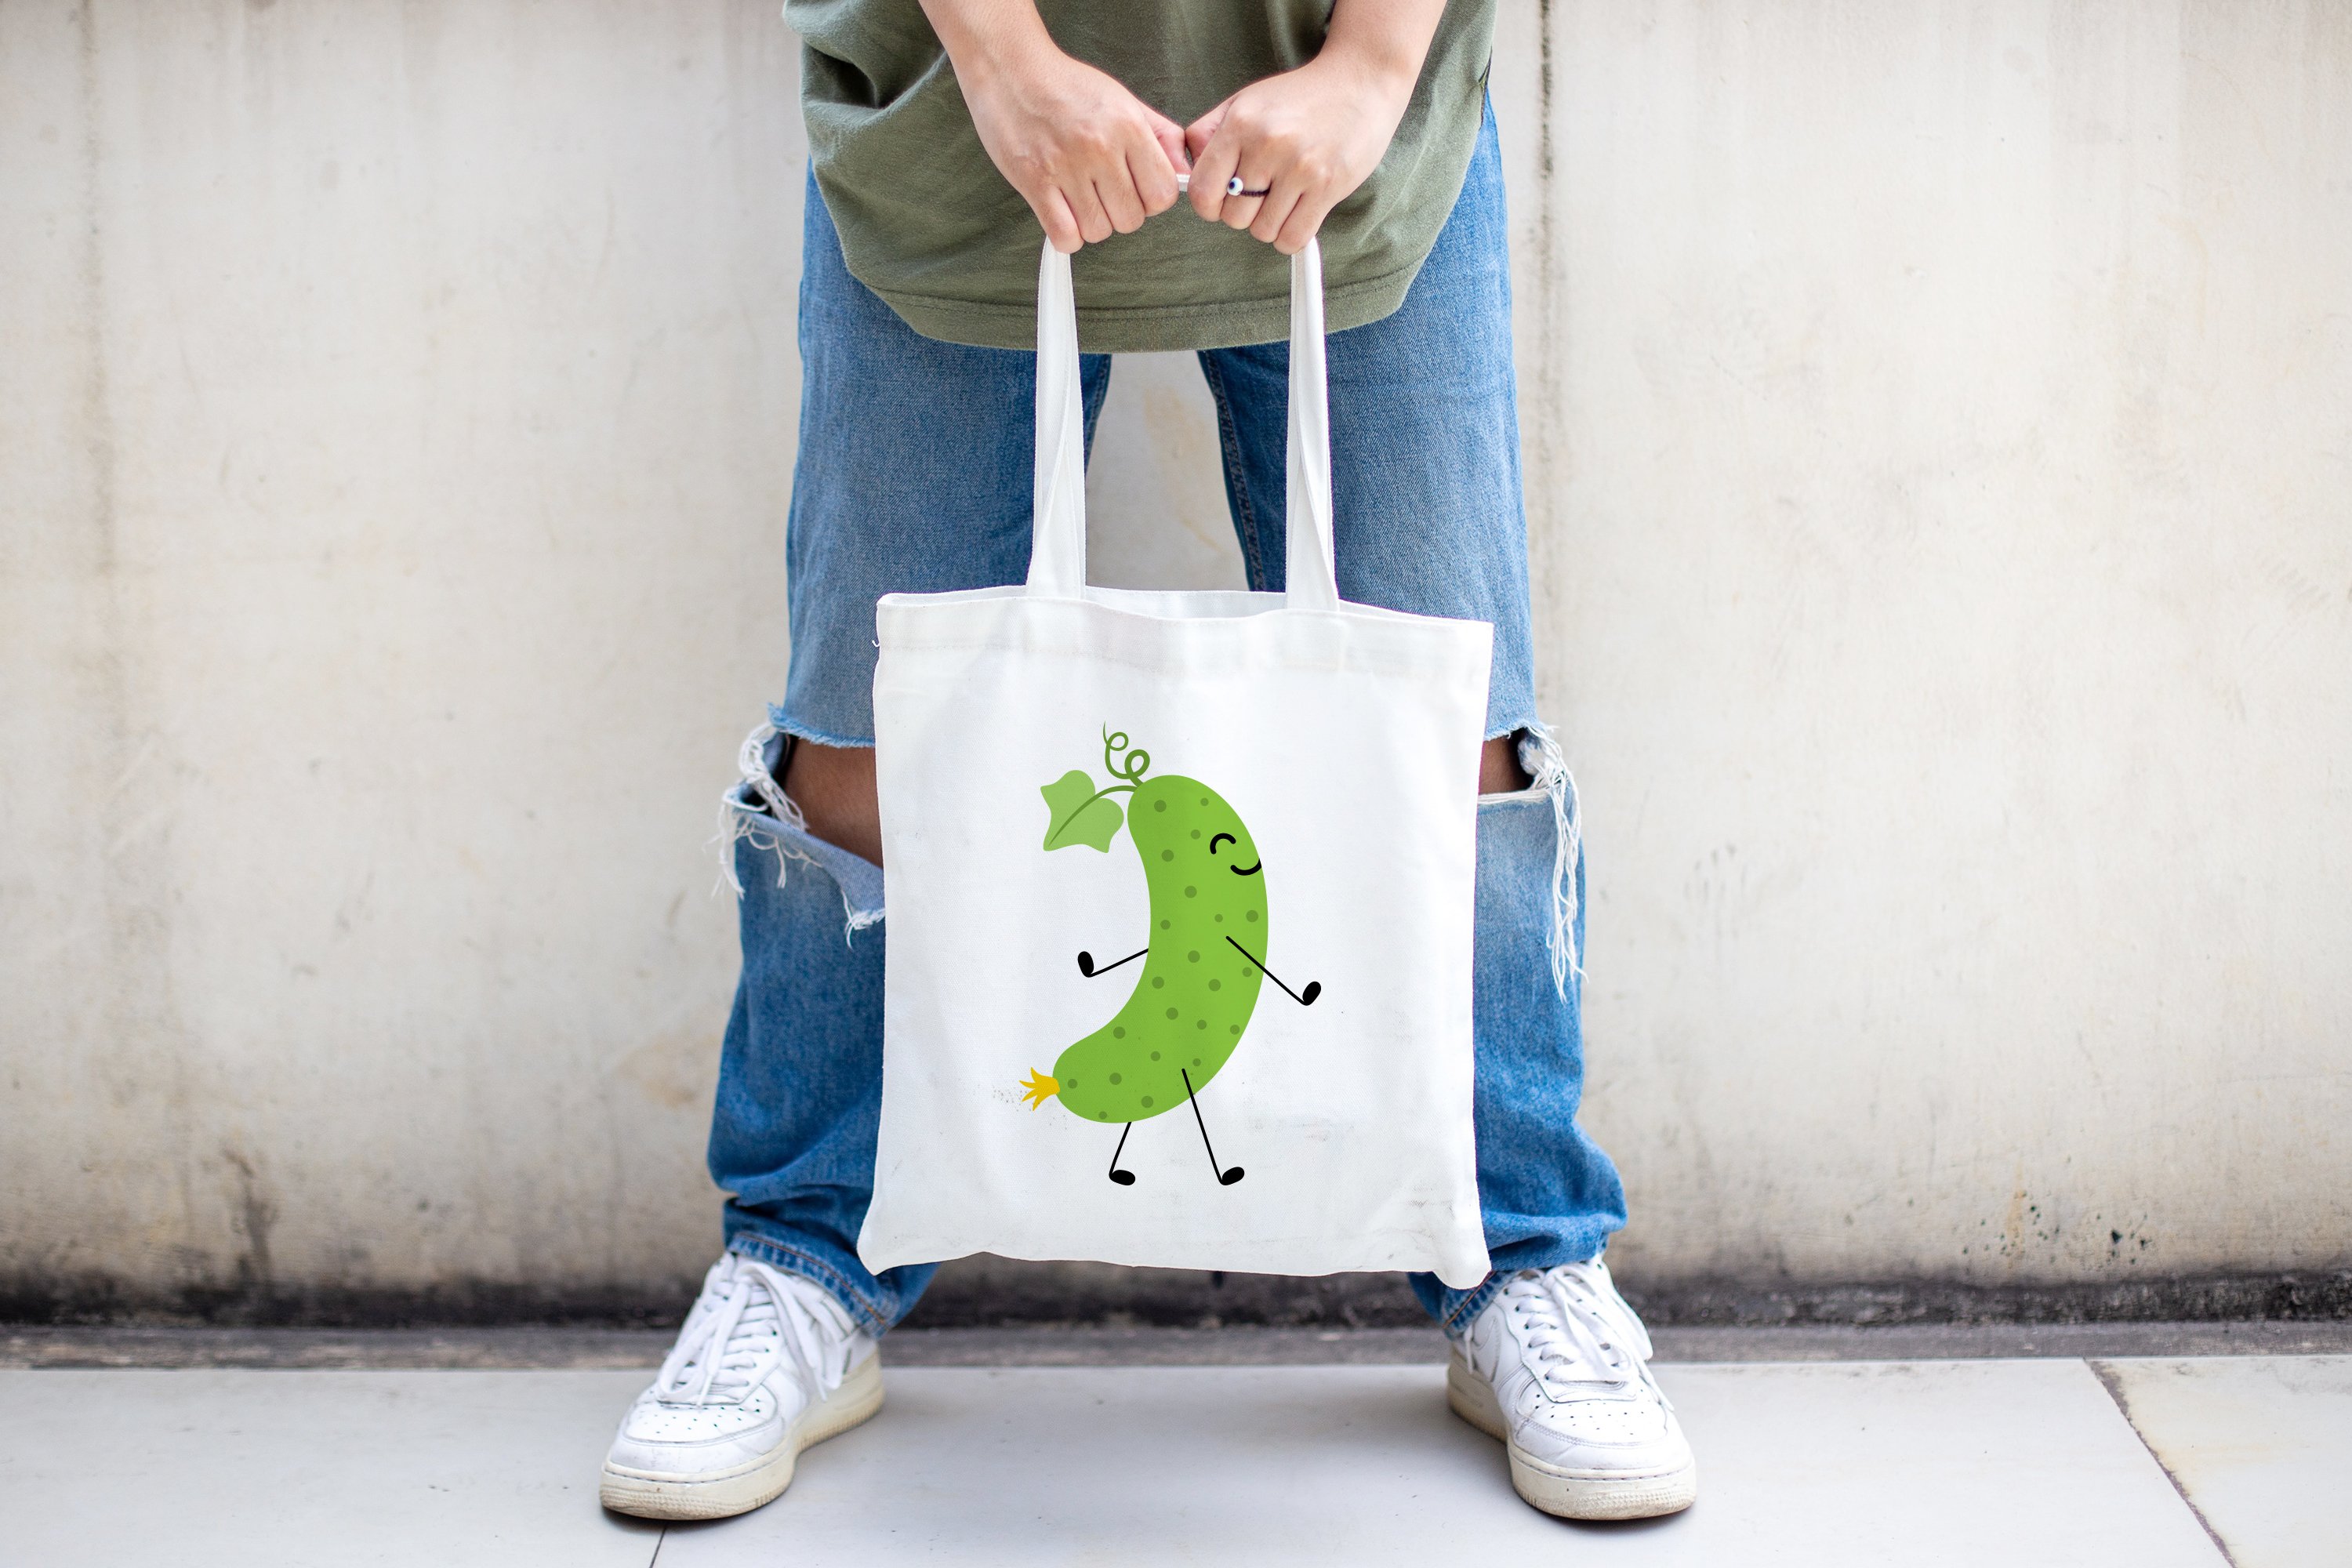 Cucumber cartoon cute happy smiling preview image.